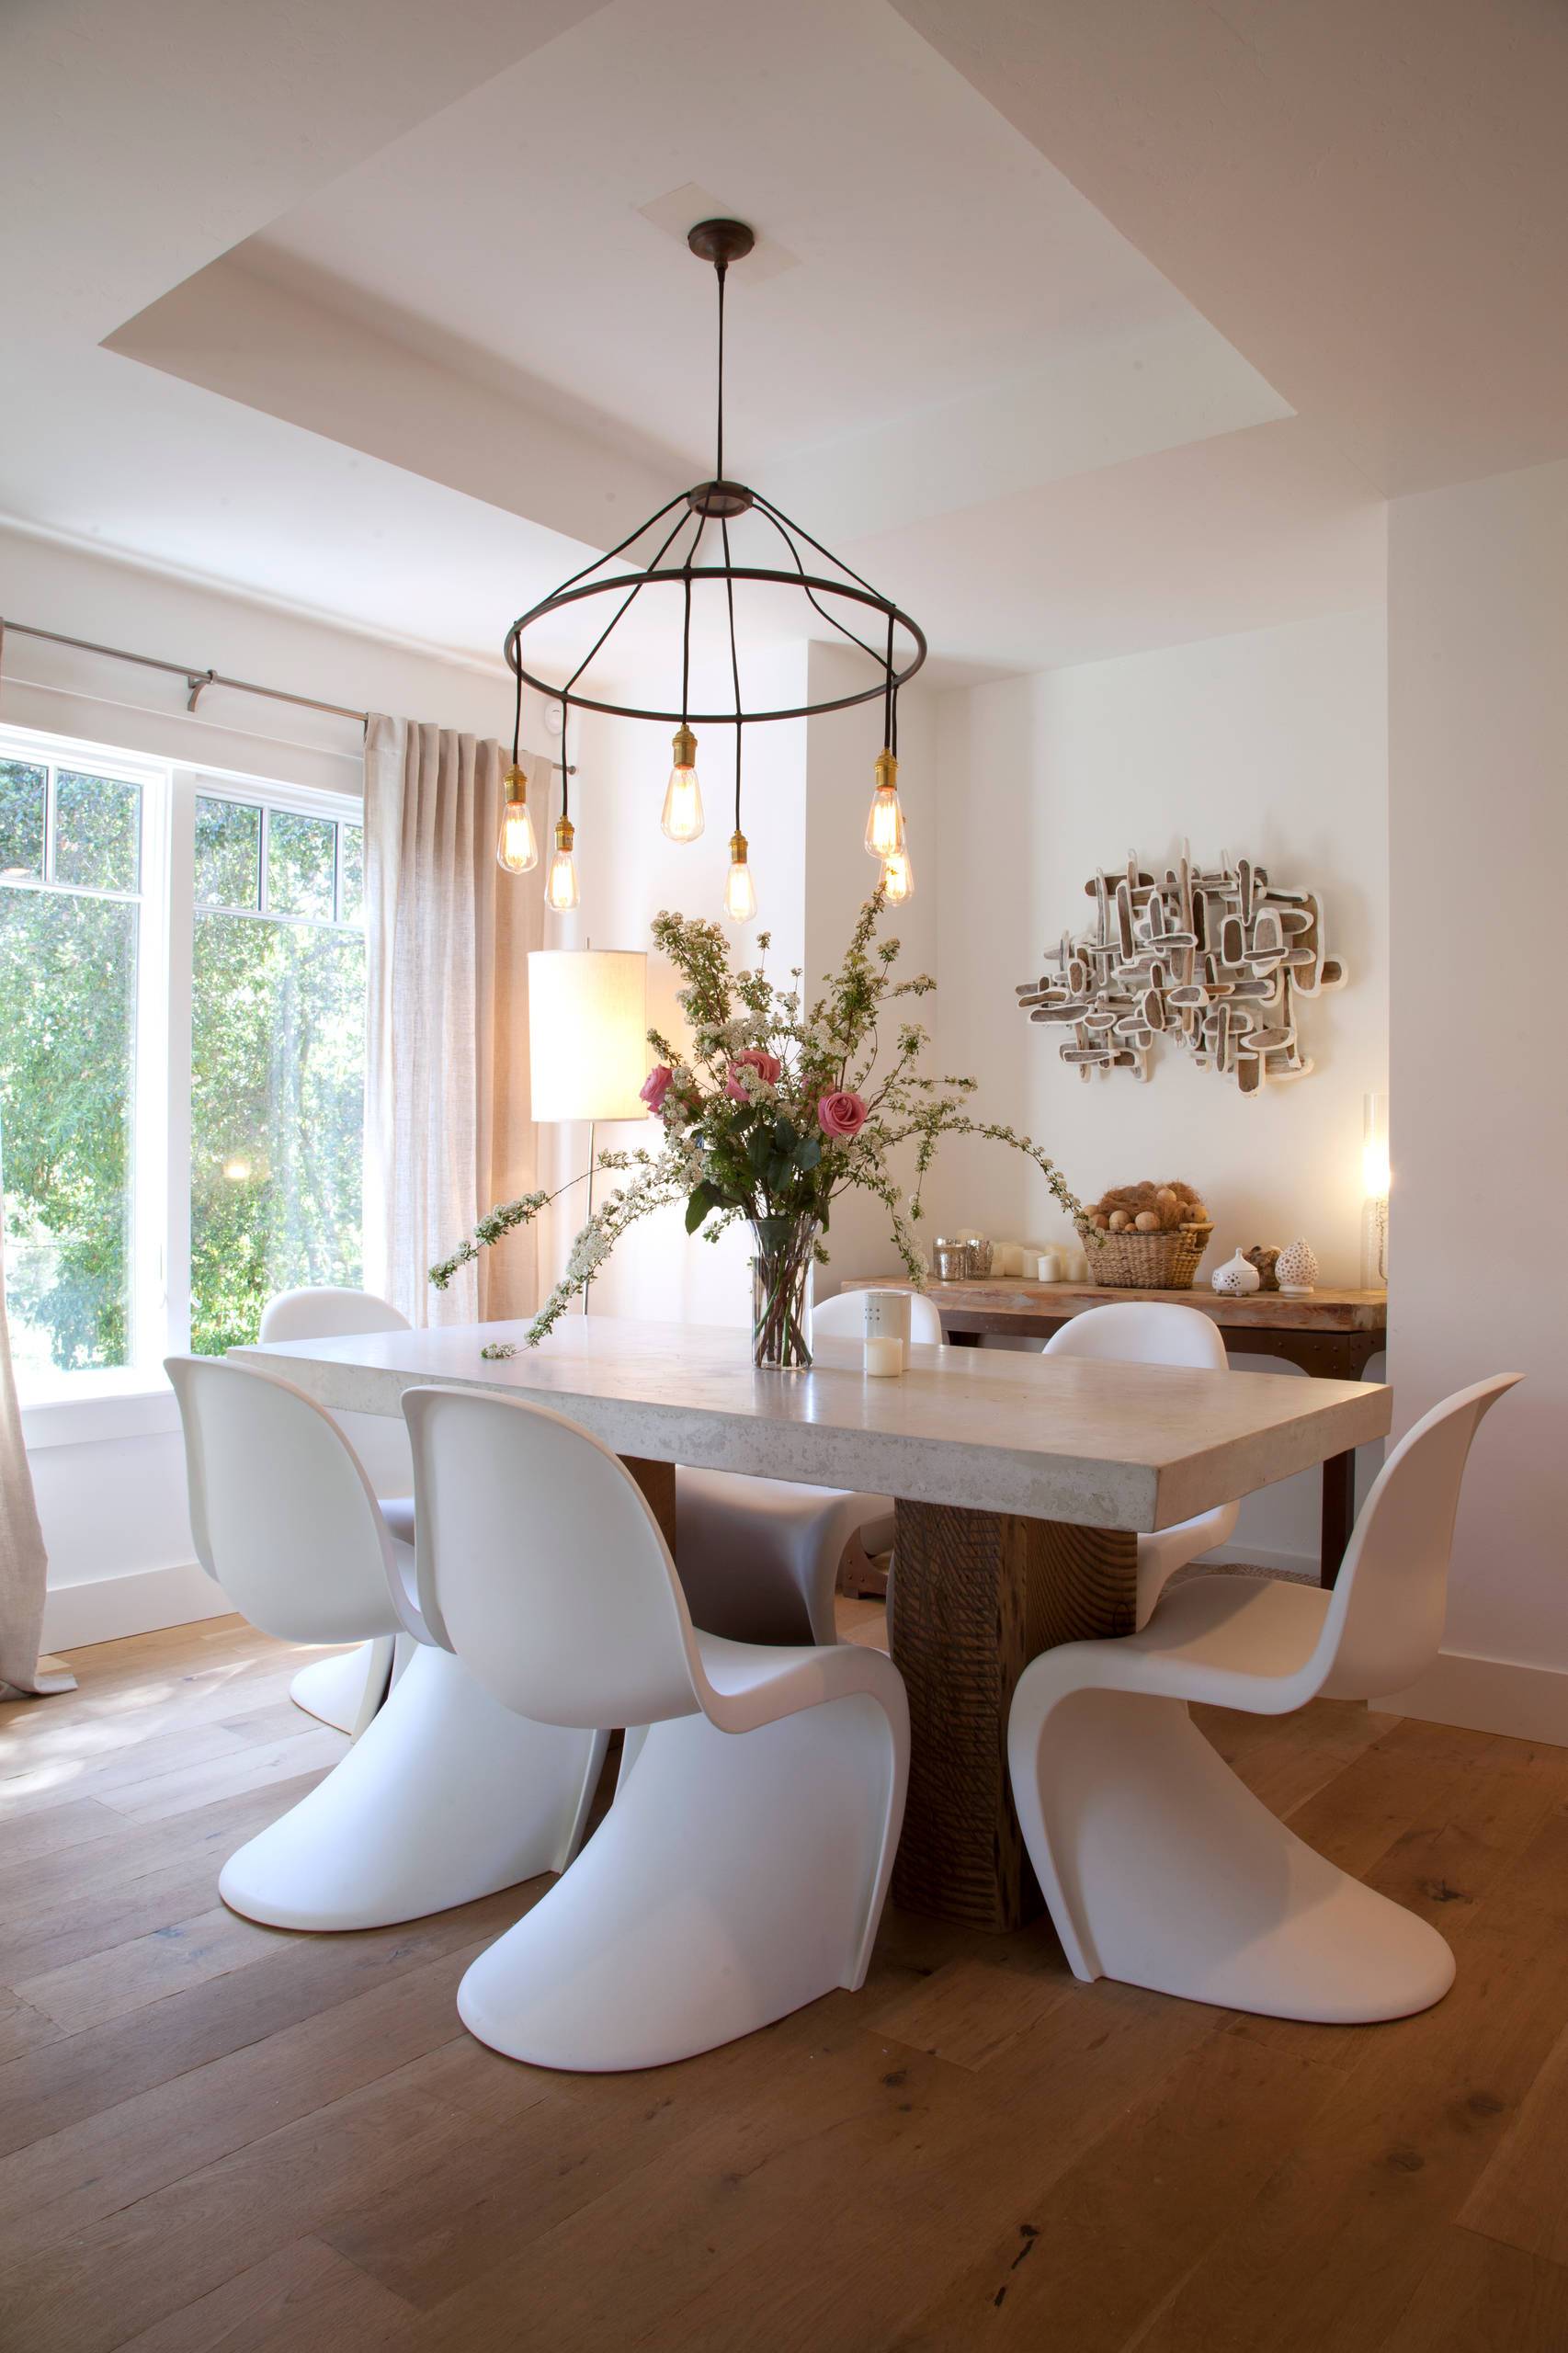 Wall decor with organic feel to match the vibe (from Houzz)